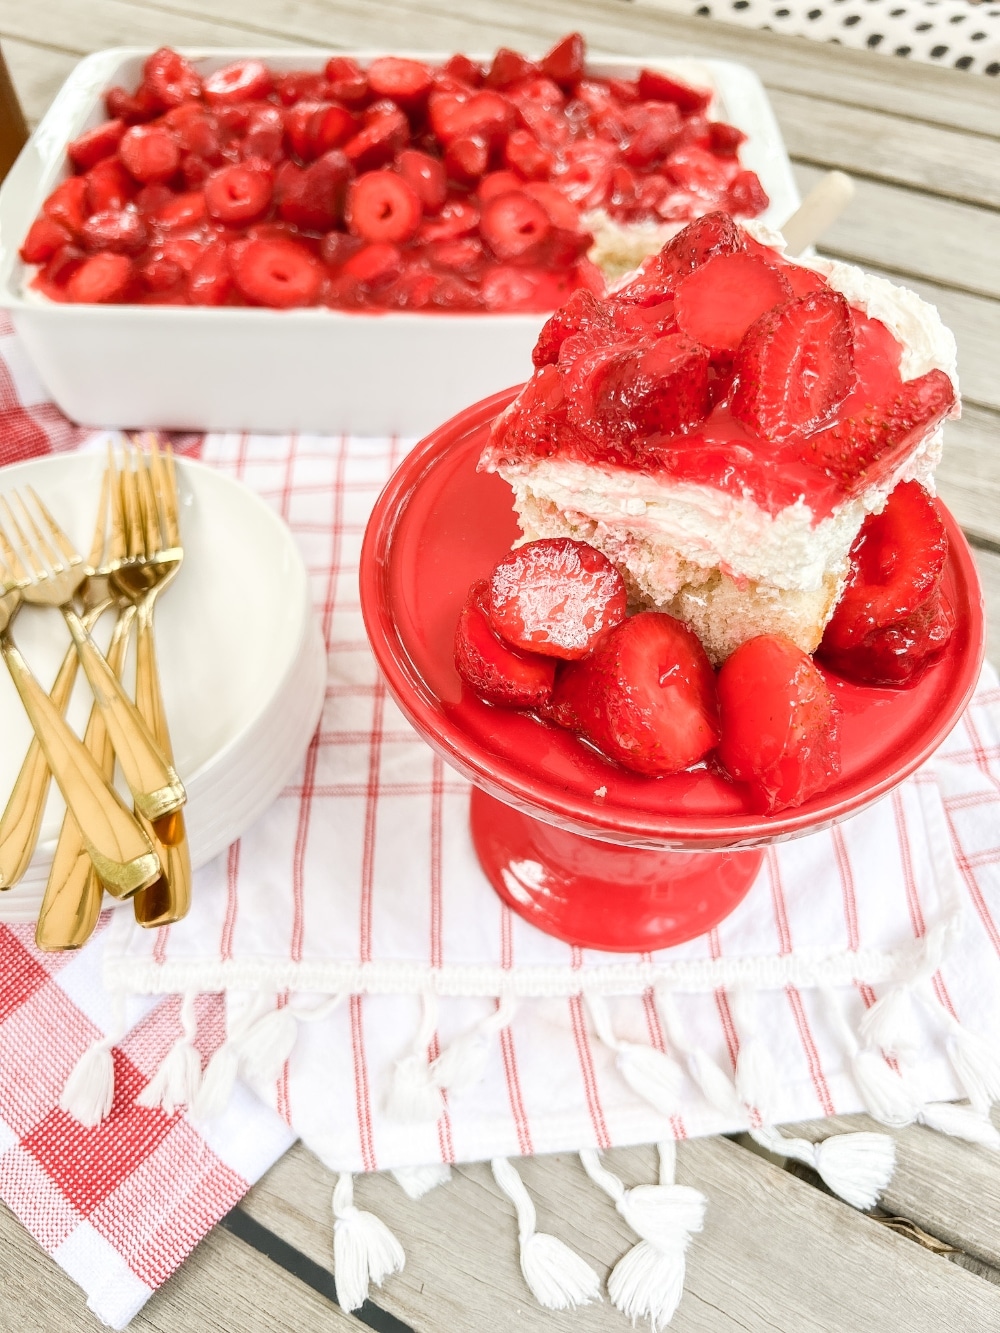 The BEST Fresh Strawberry Cream Cheese Cake Recipe. Moist white cake covered in a fluffy layer of cream cheese and whipped cream with a topping of luscious fresh strawberries in a sweet strawberry glaze. Everyone will fall in love with this delicious, easy cake. 